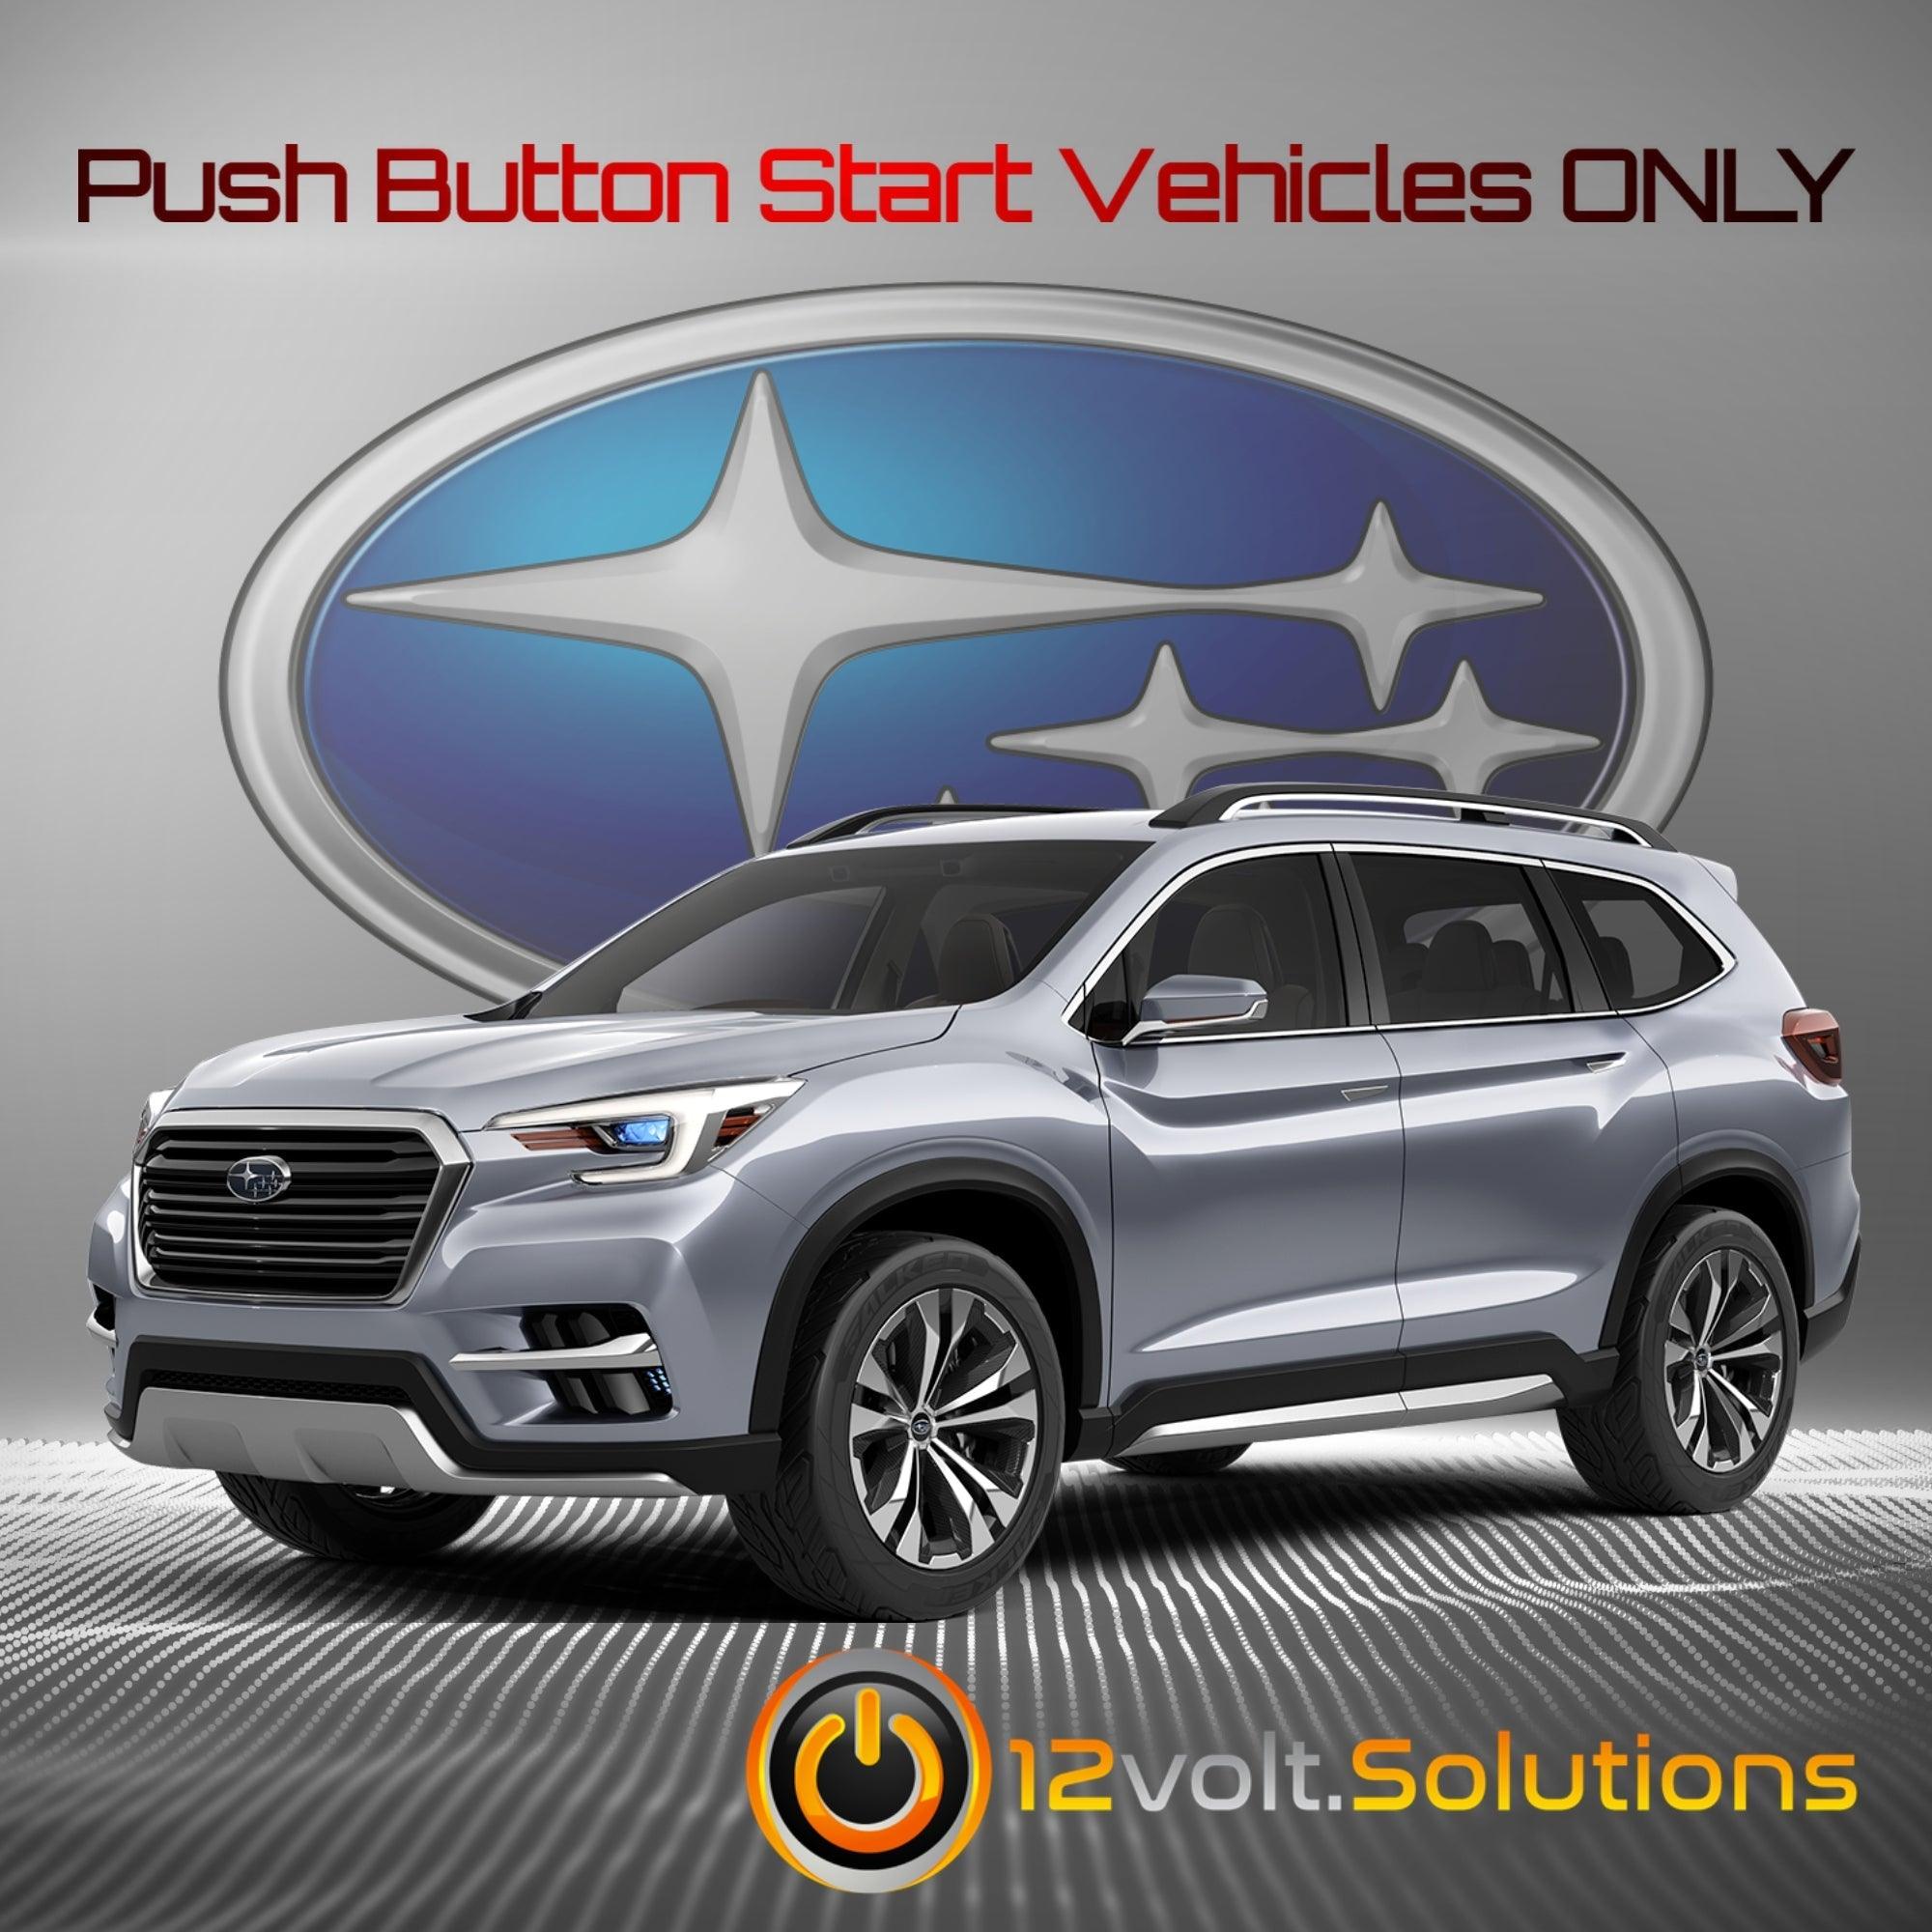 2019-2022 Subaru Ascent Plug and Play Remote Start Kit (Push Button Start)-12Volt.Solutions